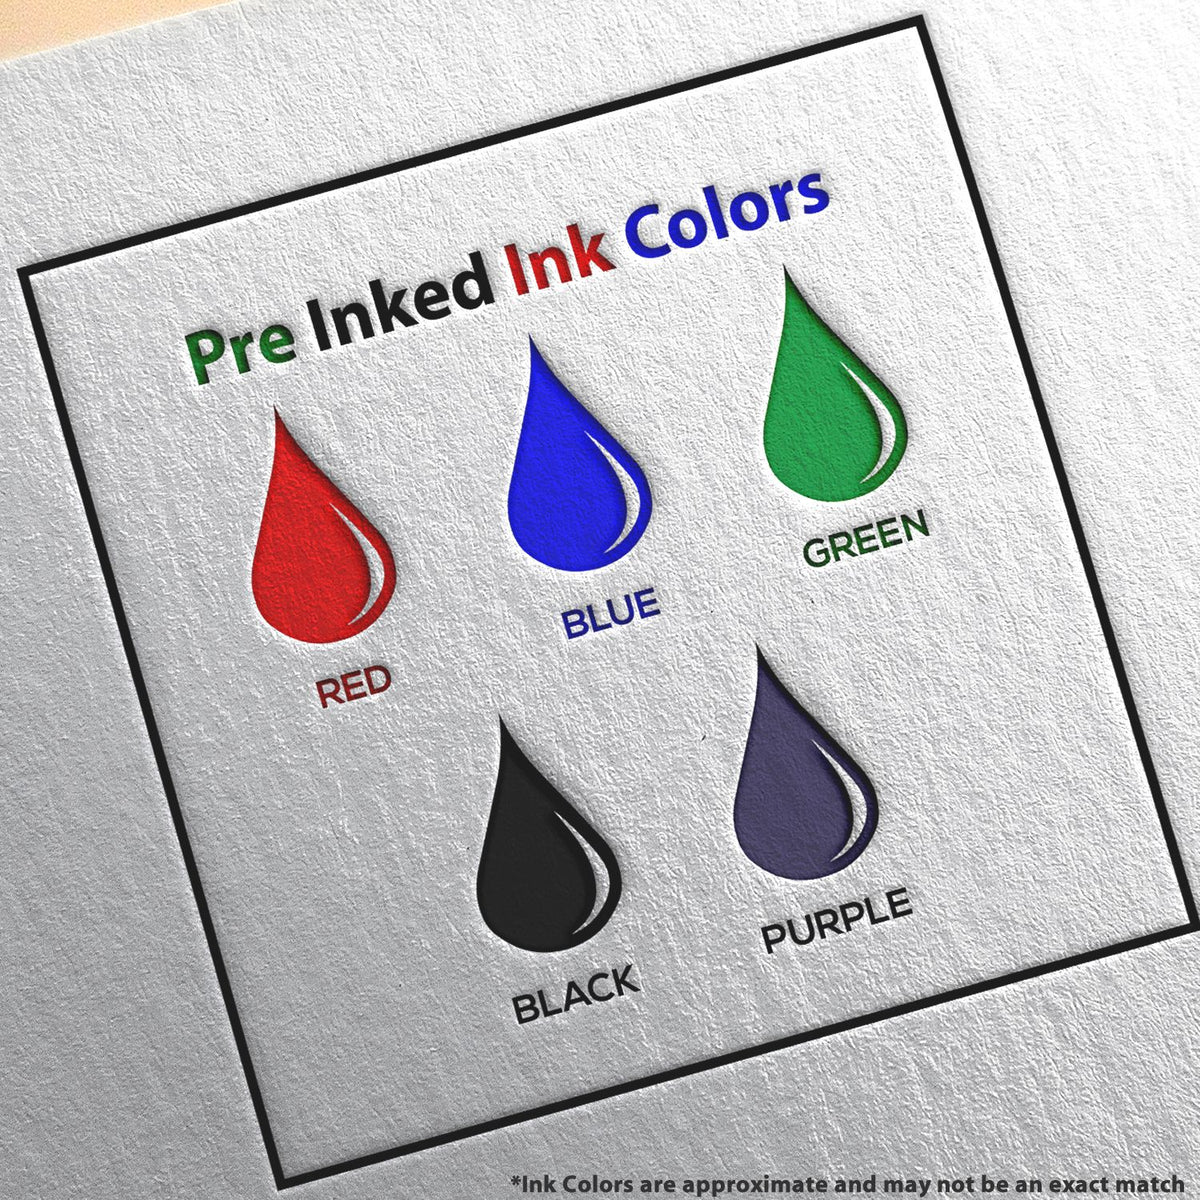 A picture showing the different ink colors or hues available for the Premium MaxLight Pre-Inked Illinois Landscape Architectural Stamp product.